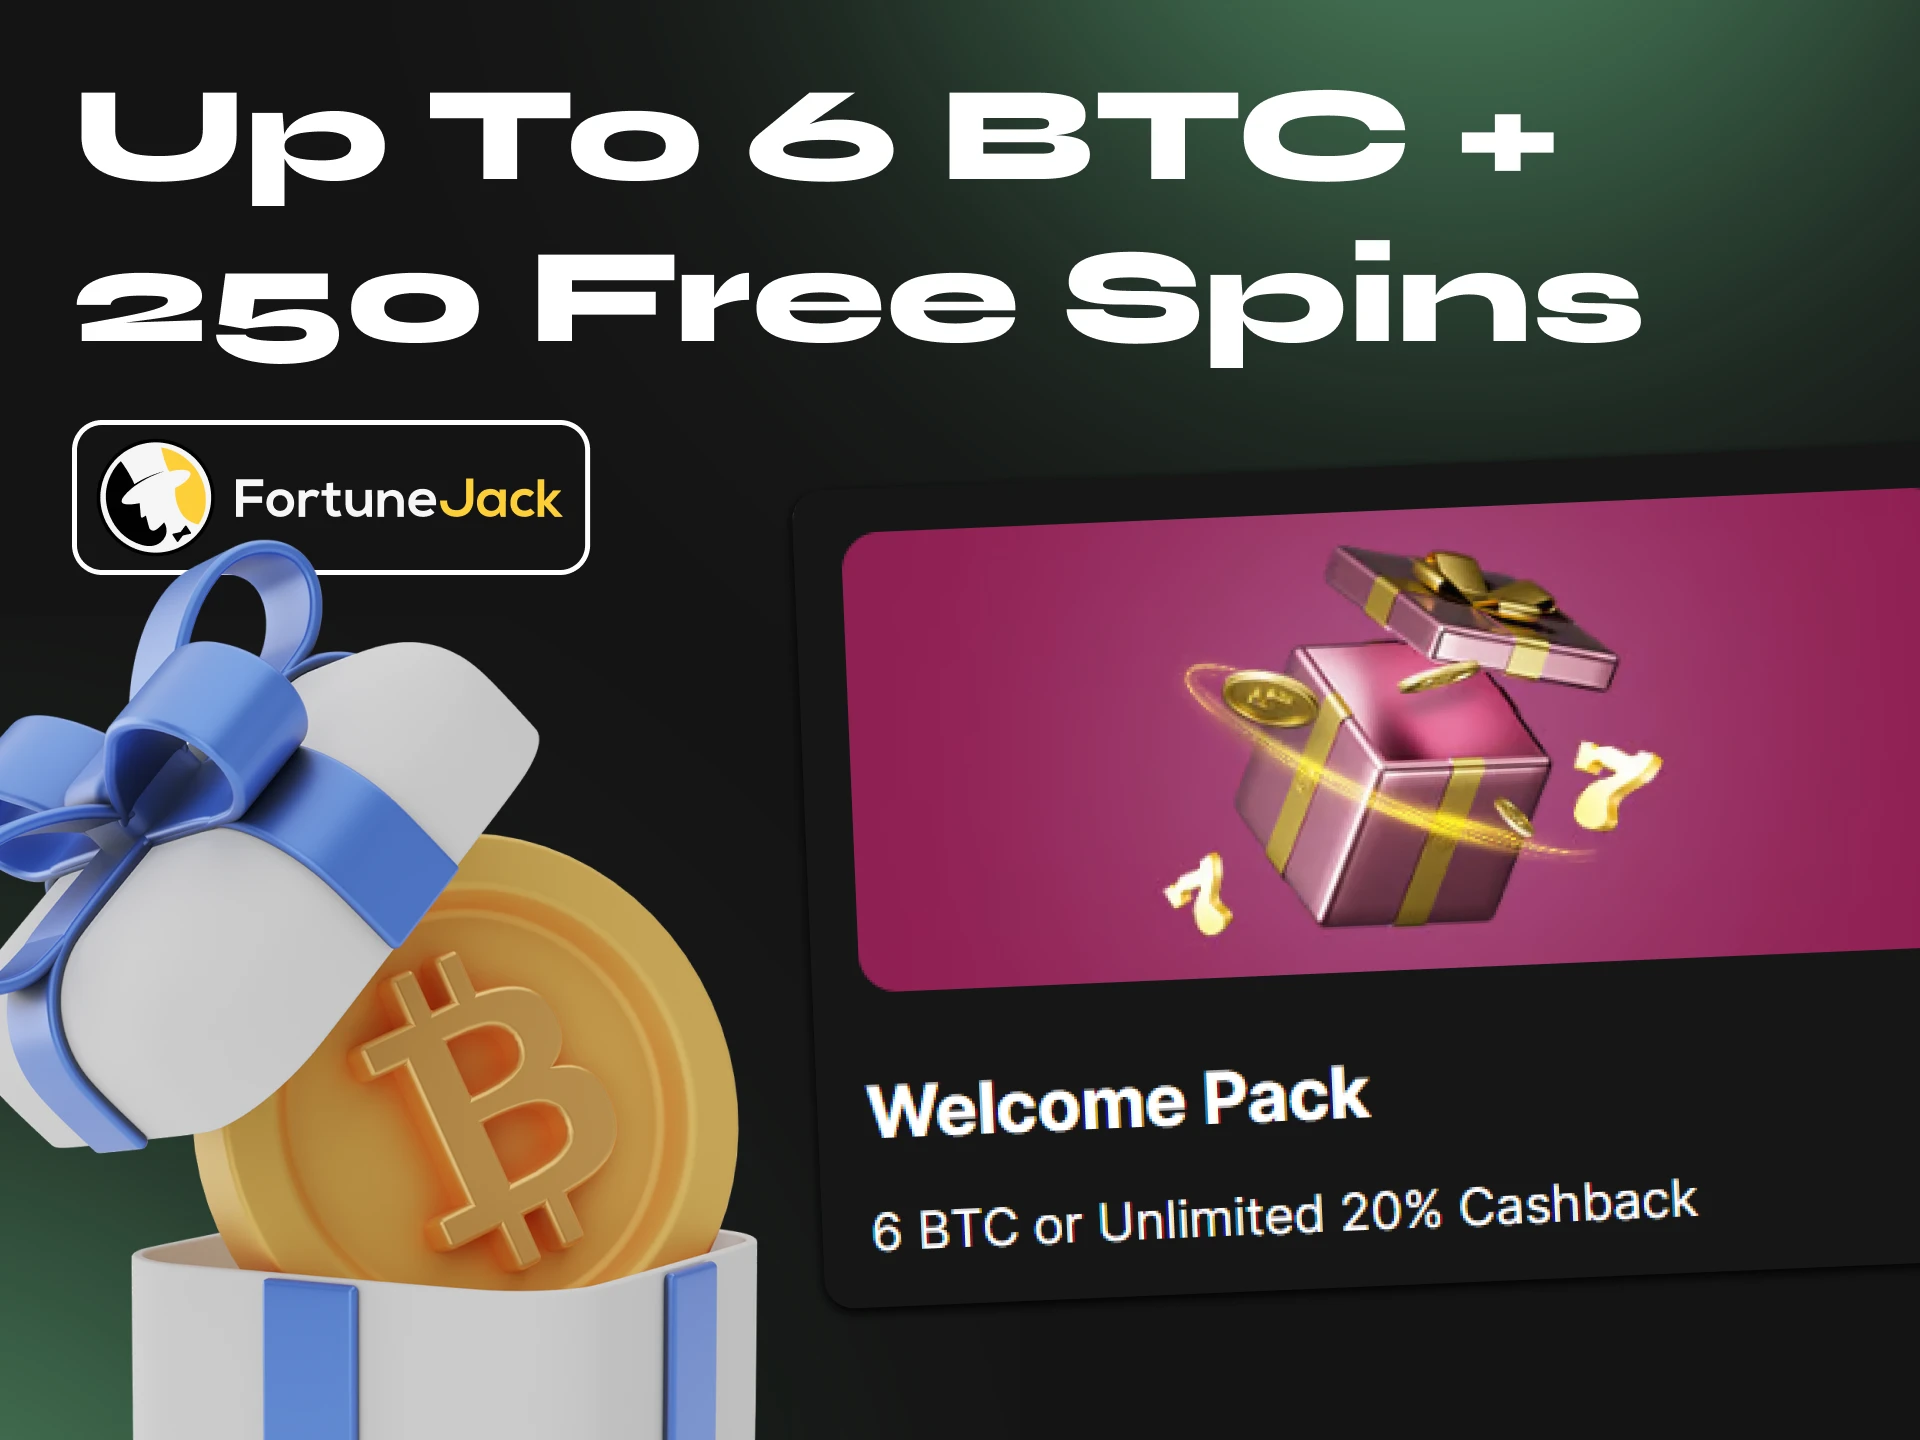 Get the FortuneJack welcome bonus and start playing poker.